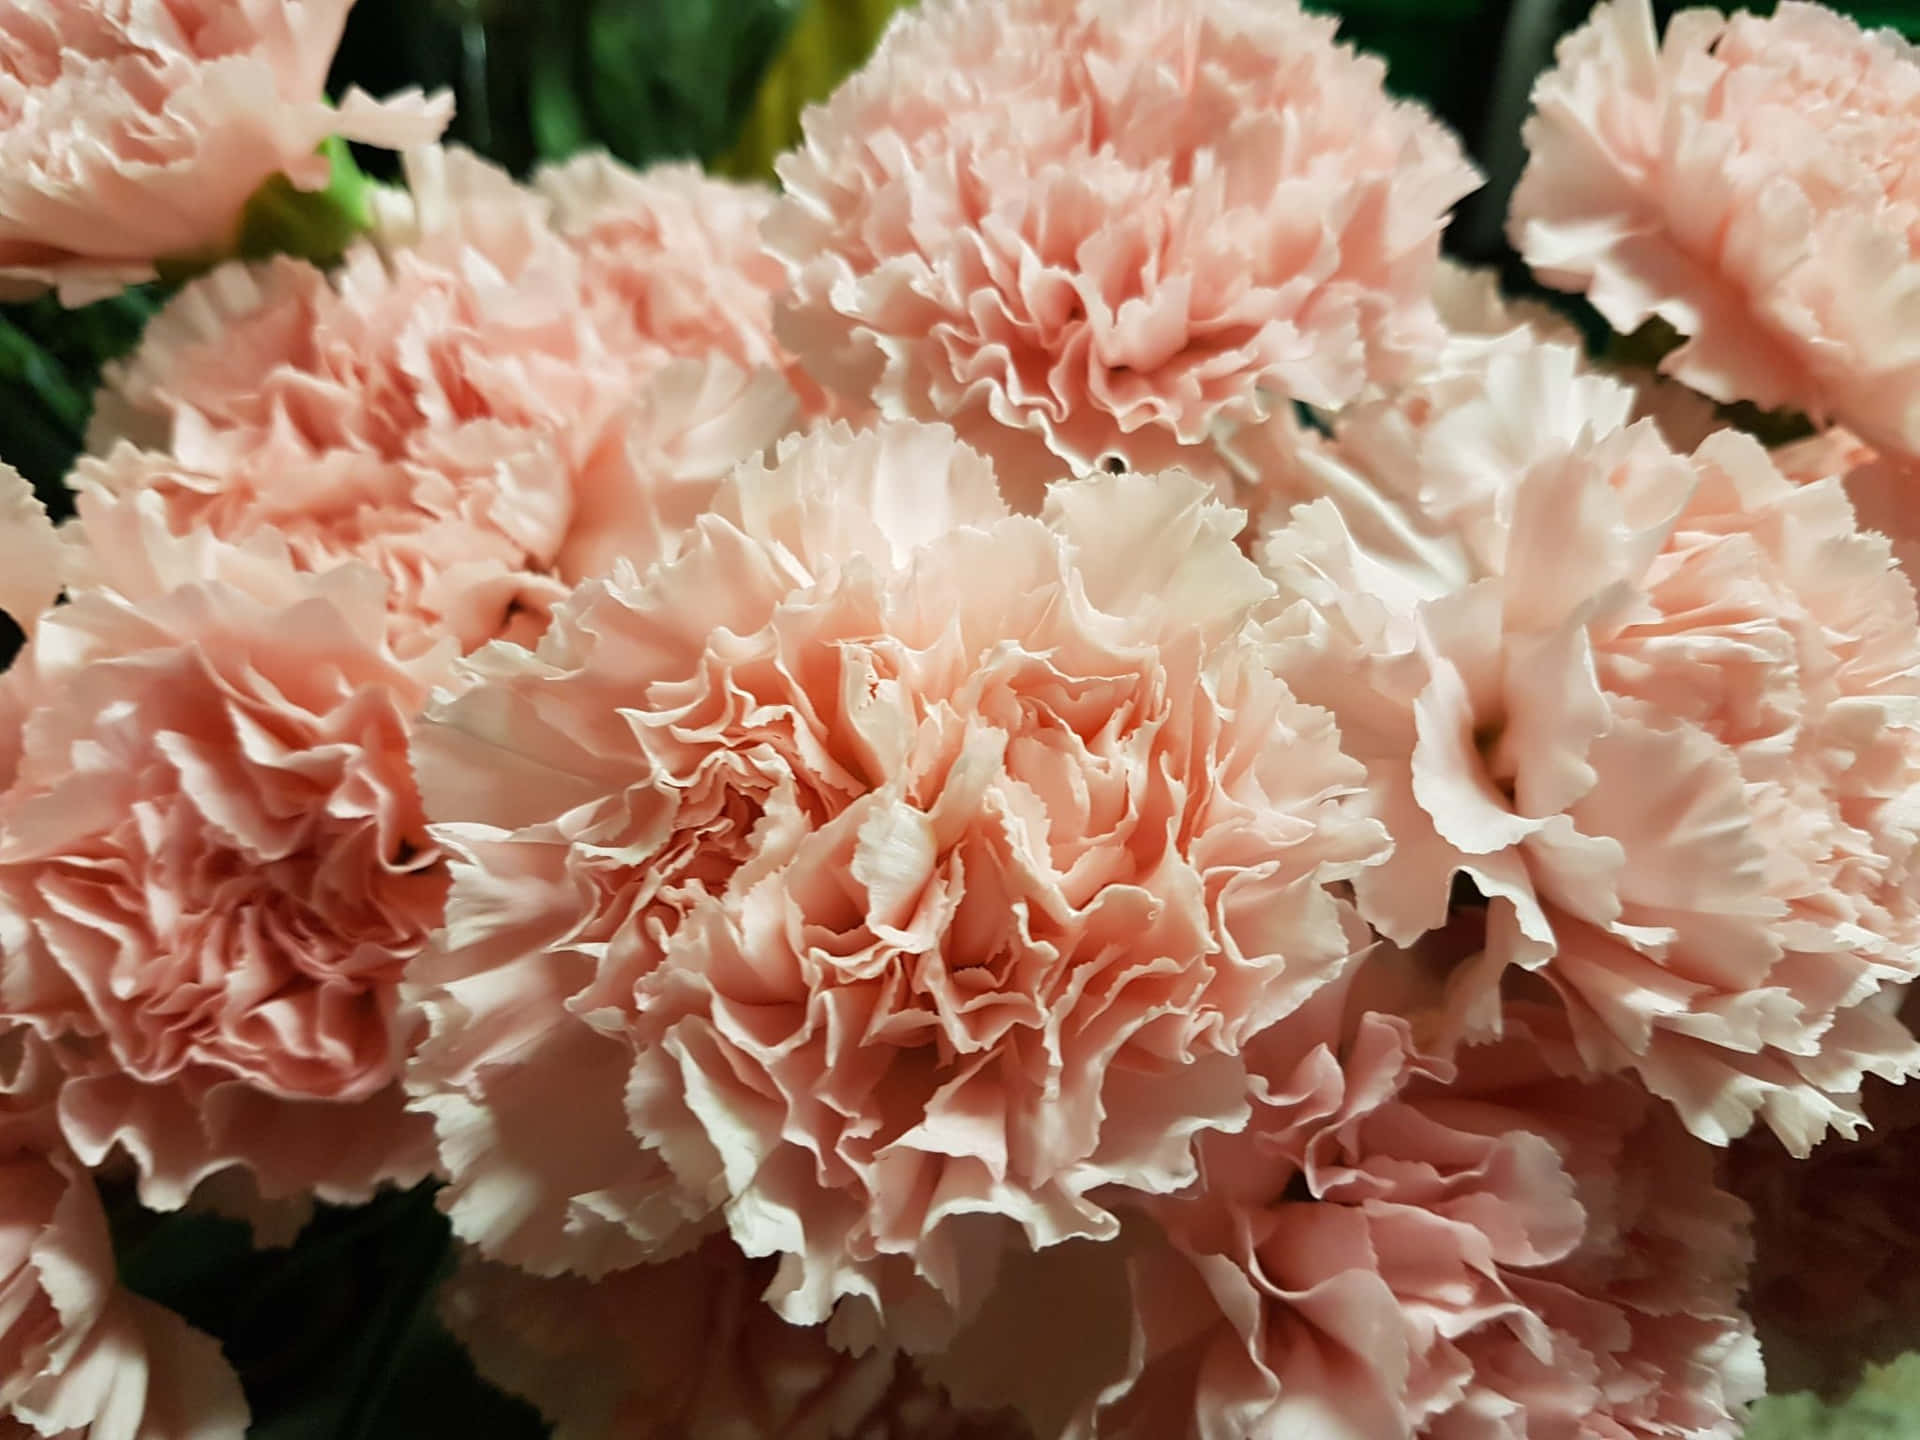 A vibrant pink carnation set against a calming green background